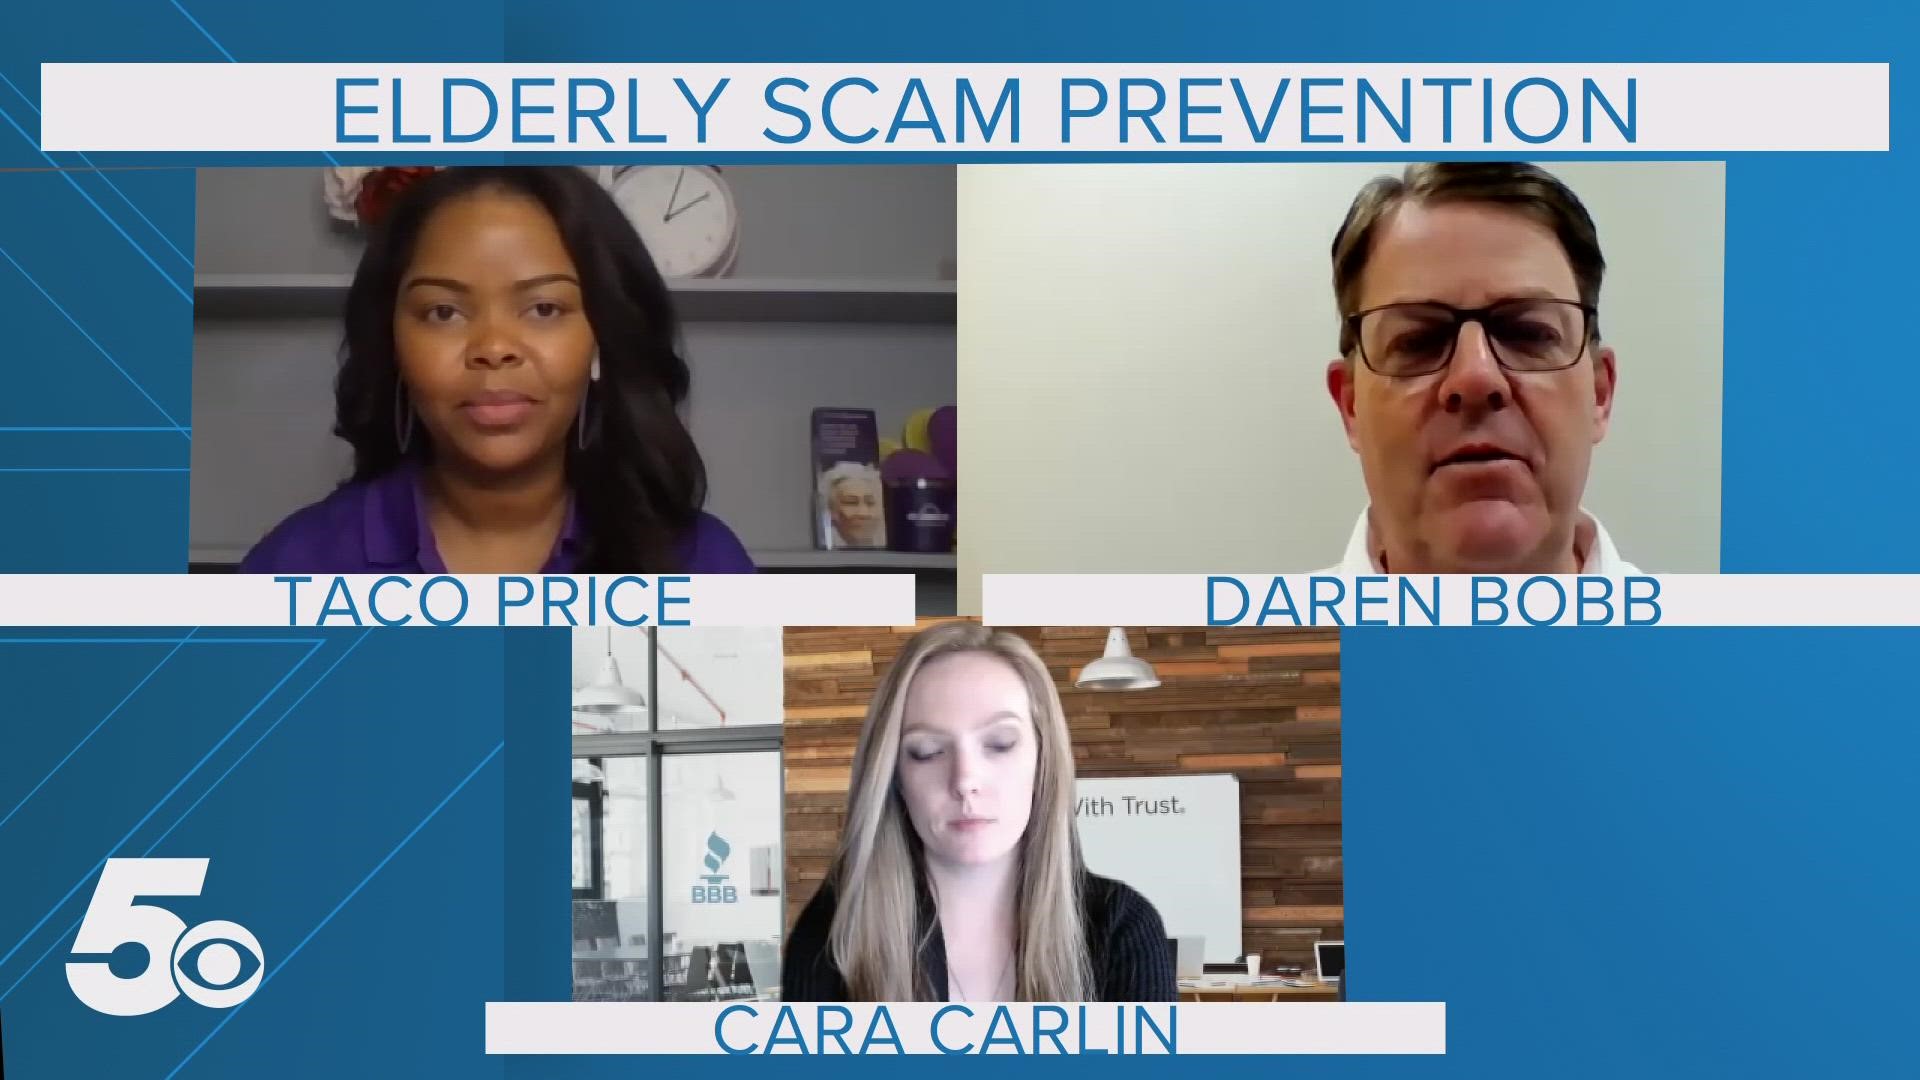 Cara Carlin with the Better Business Bureau of Arkansas and Taco Price with the Alzheimer’s Association of Arkansas spoke with 5NEWS Anchor Daren Bobb.